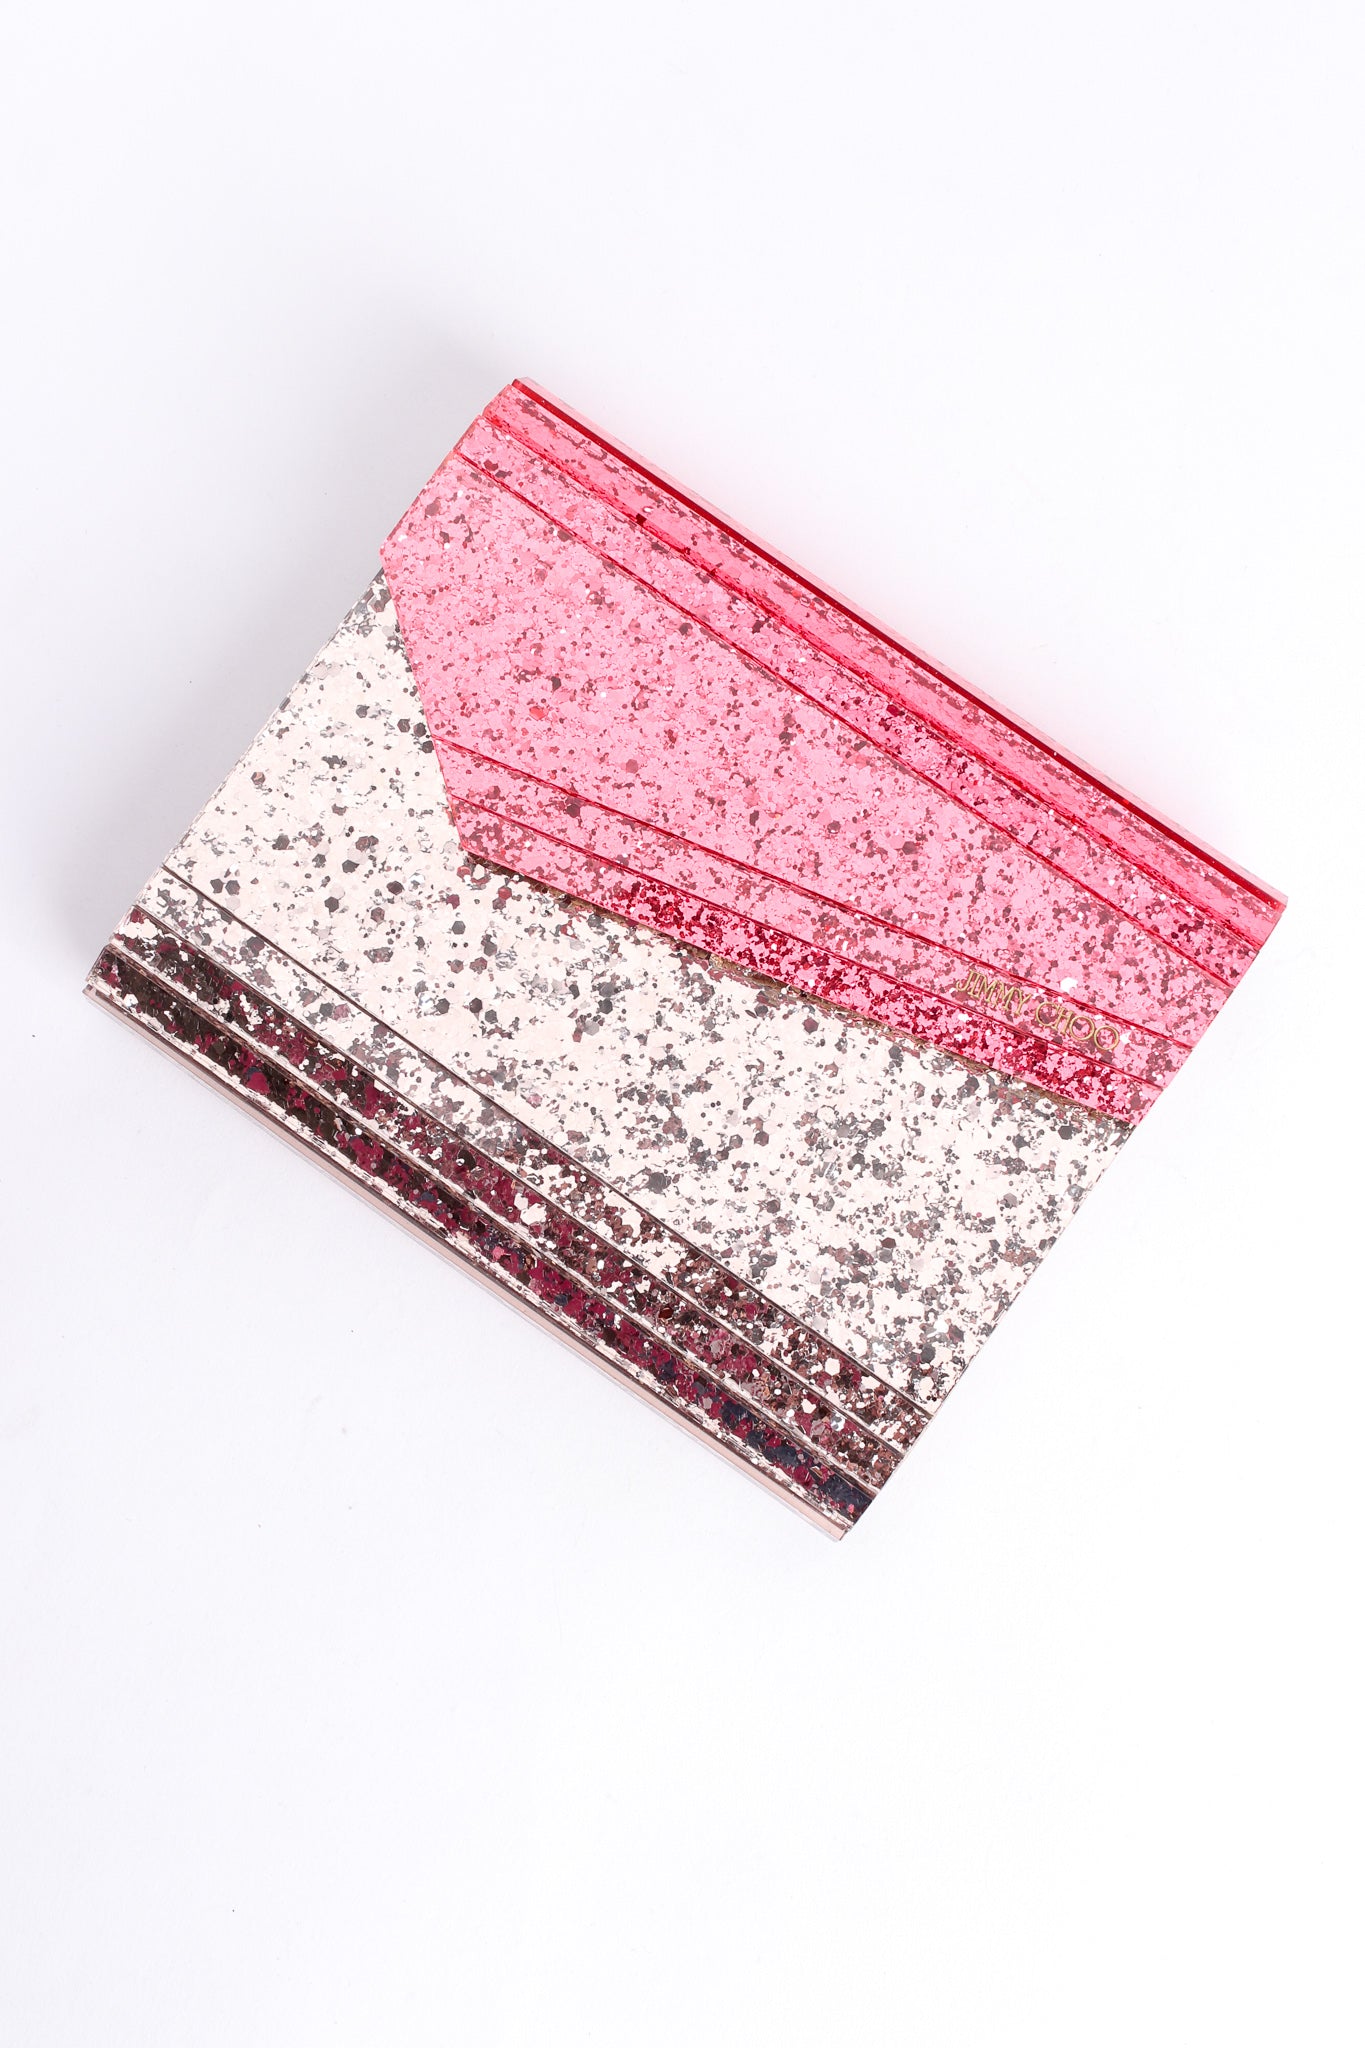 Jimmy Choo Two-Tone Acrylic Glitter Clutch Bag at Recess Los Angeles